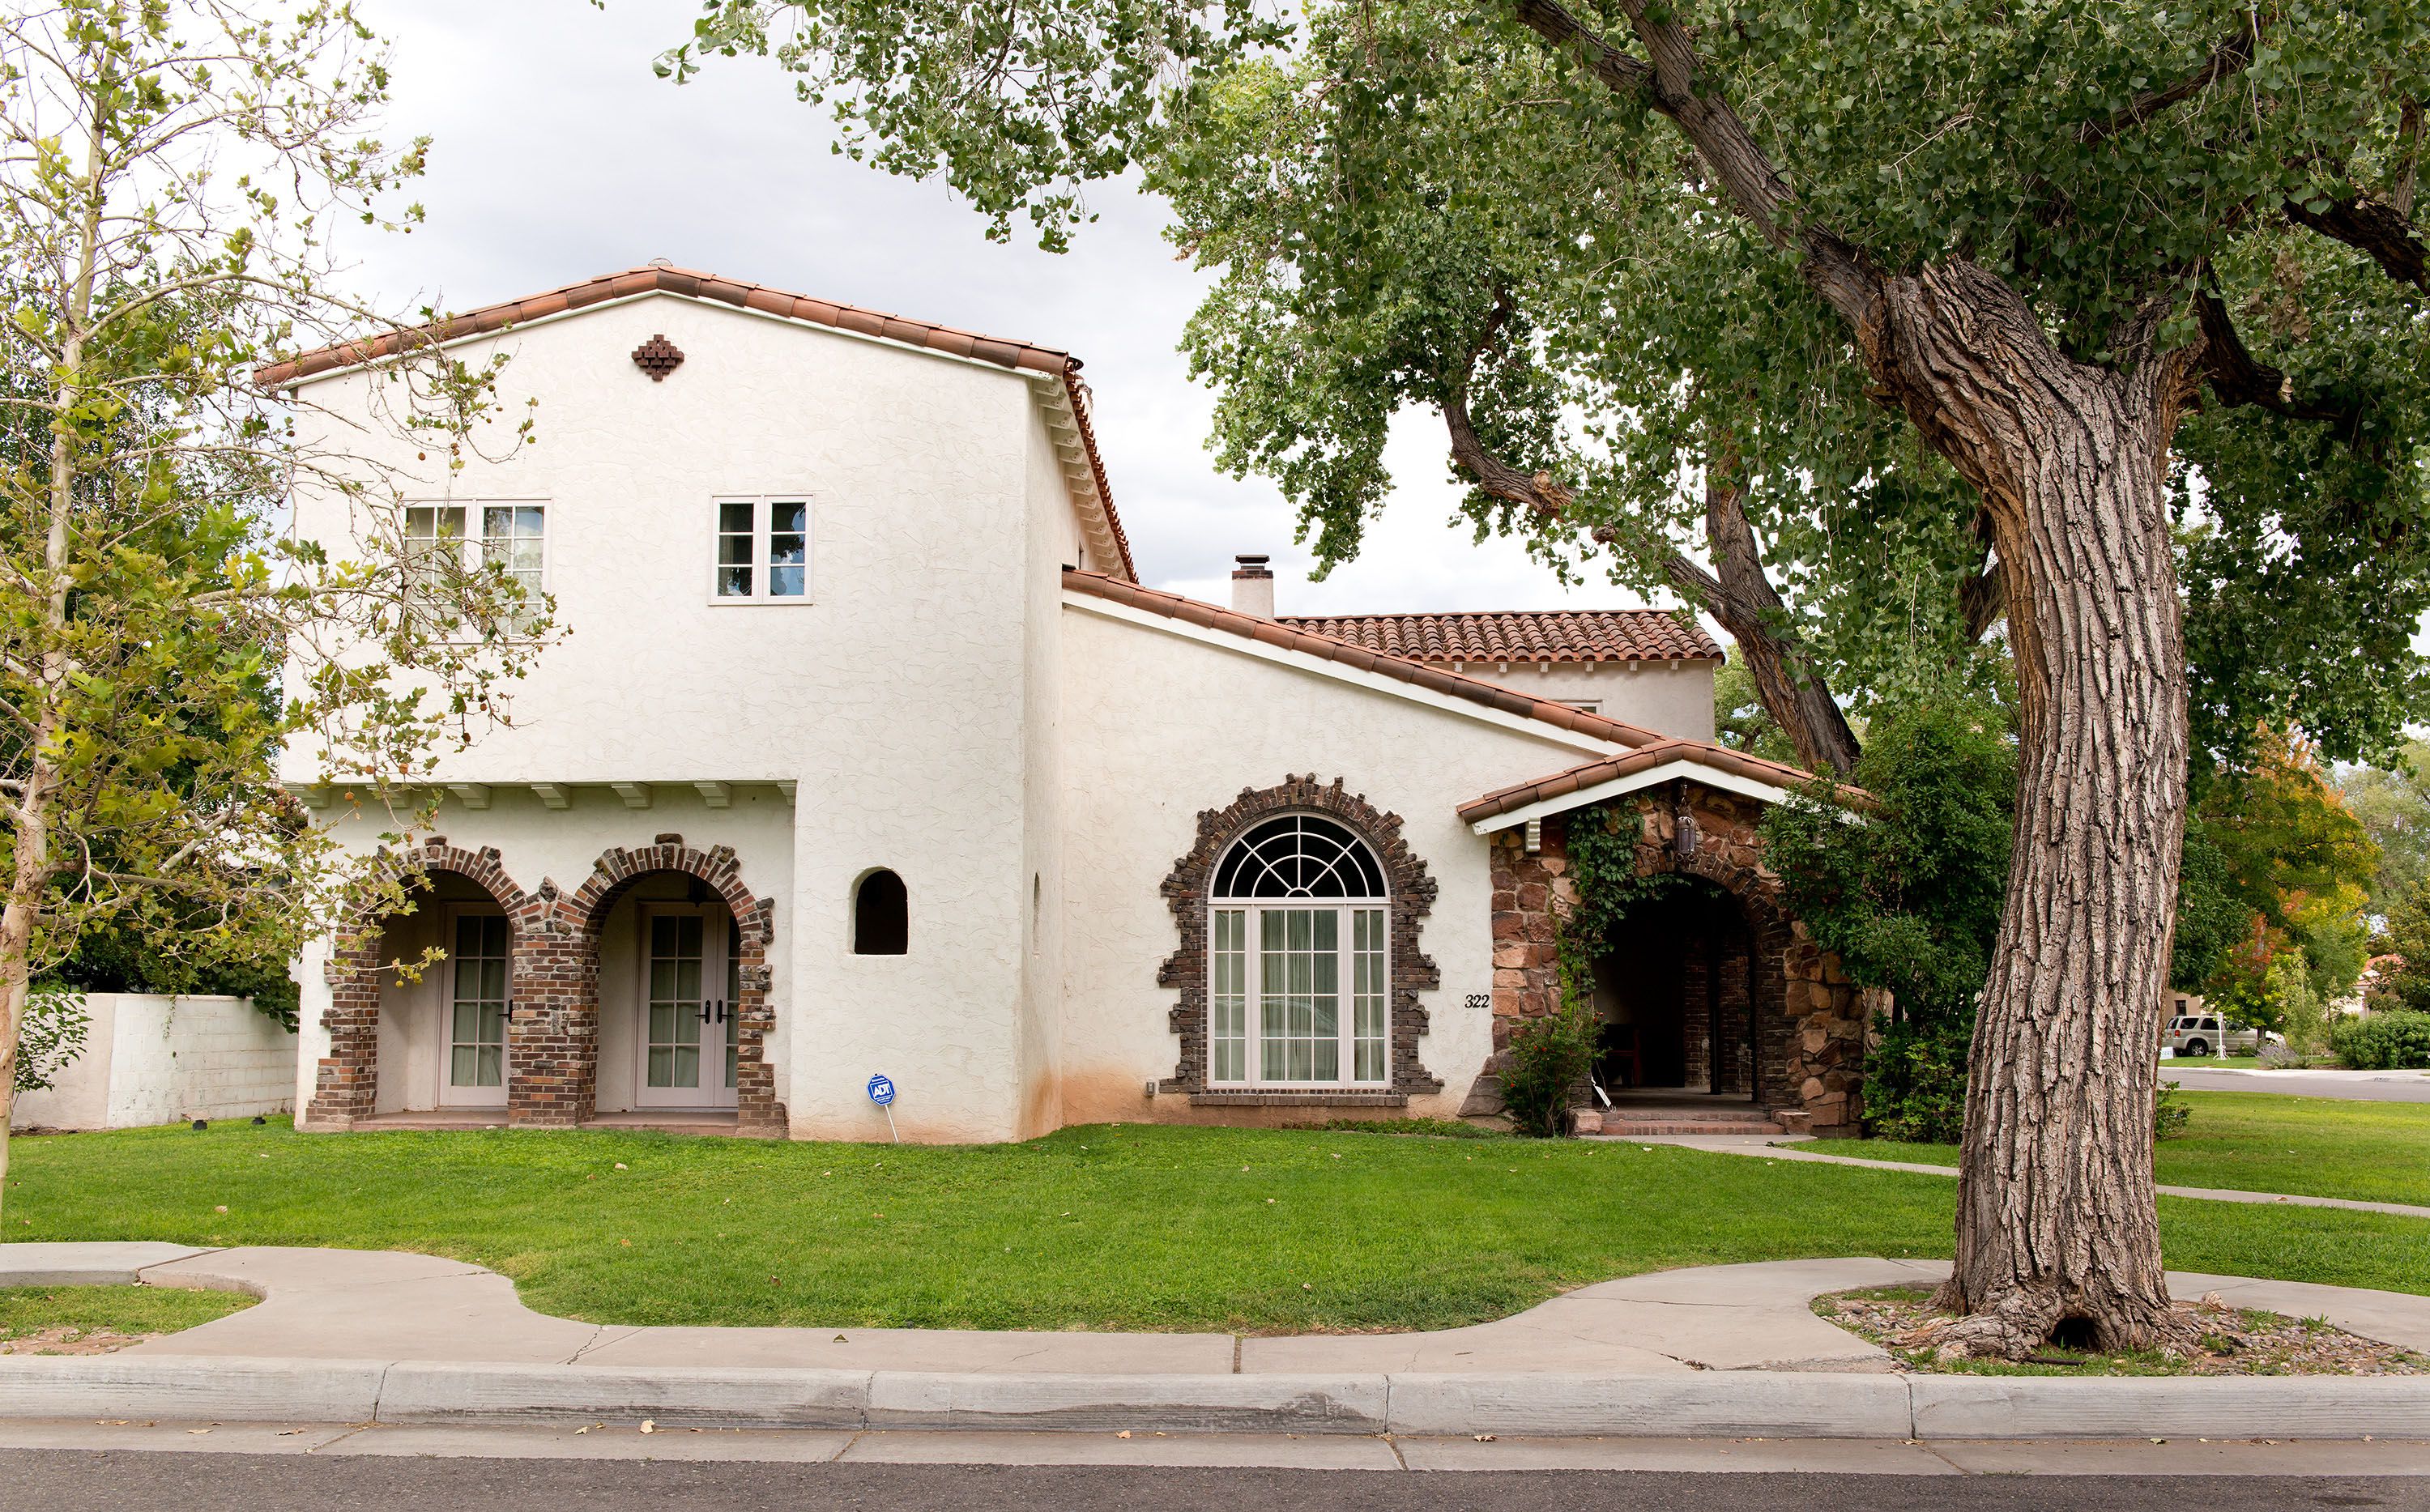 A view of Jesse Pinkman's house. (Steve Snowden&mdash;Getty Images)